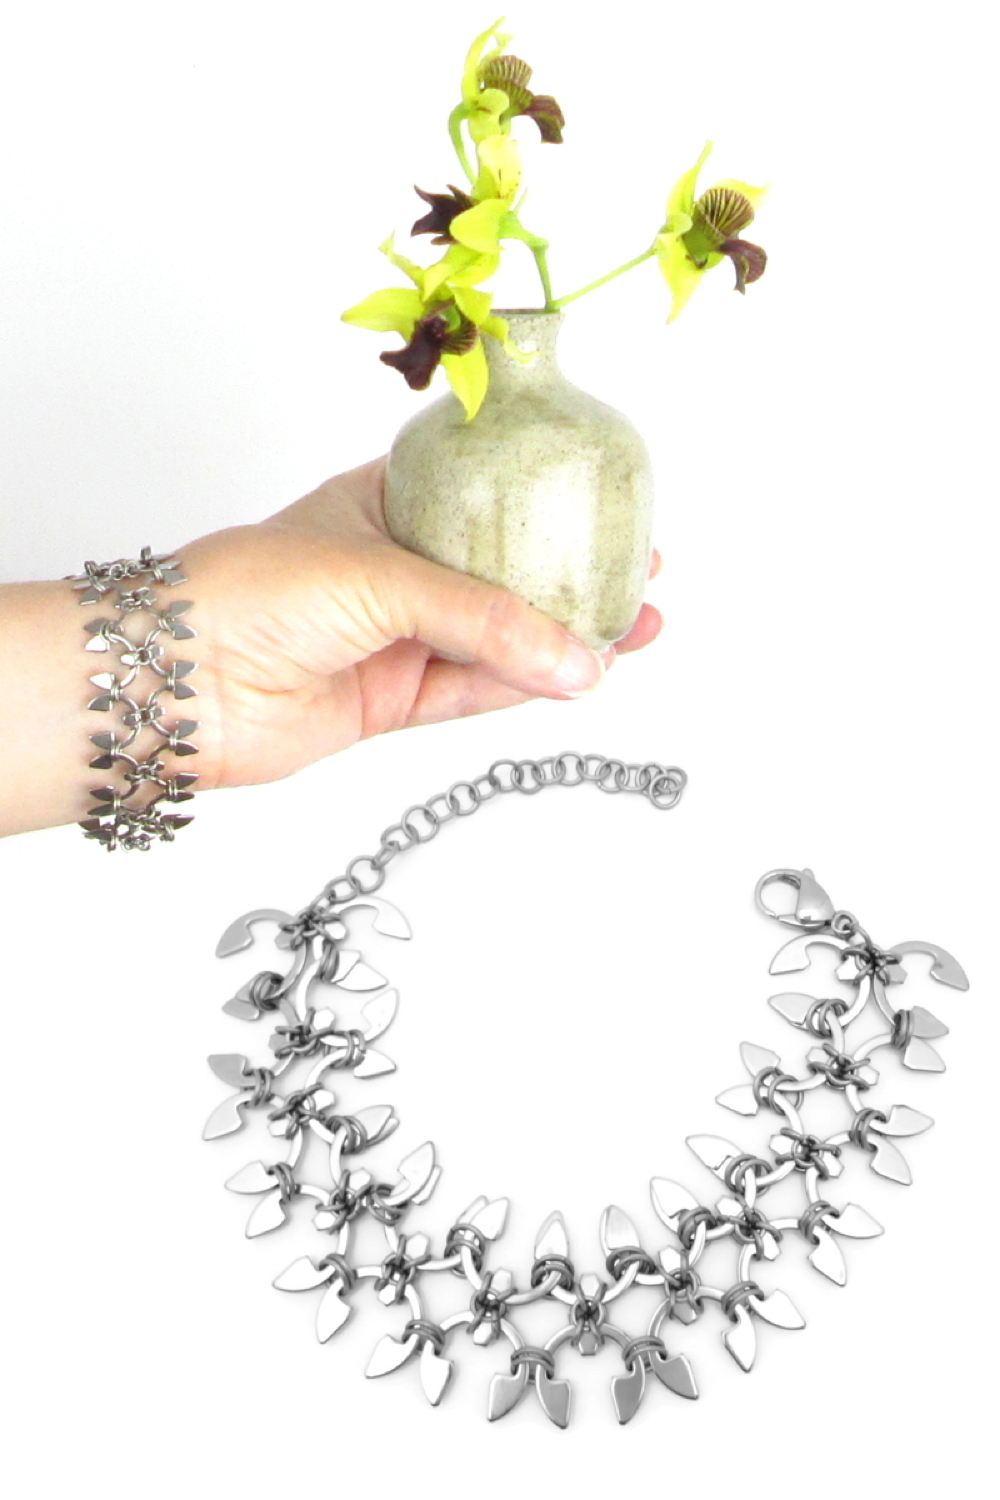 Compiled image: a hand holds a small ceramic bud vase of orchids and wears Wraptillion's Wisteria Bracelet, above a photo of the bracelet curved into a circle to show the articulated design.